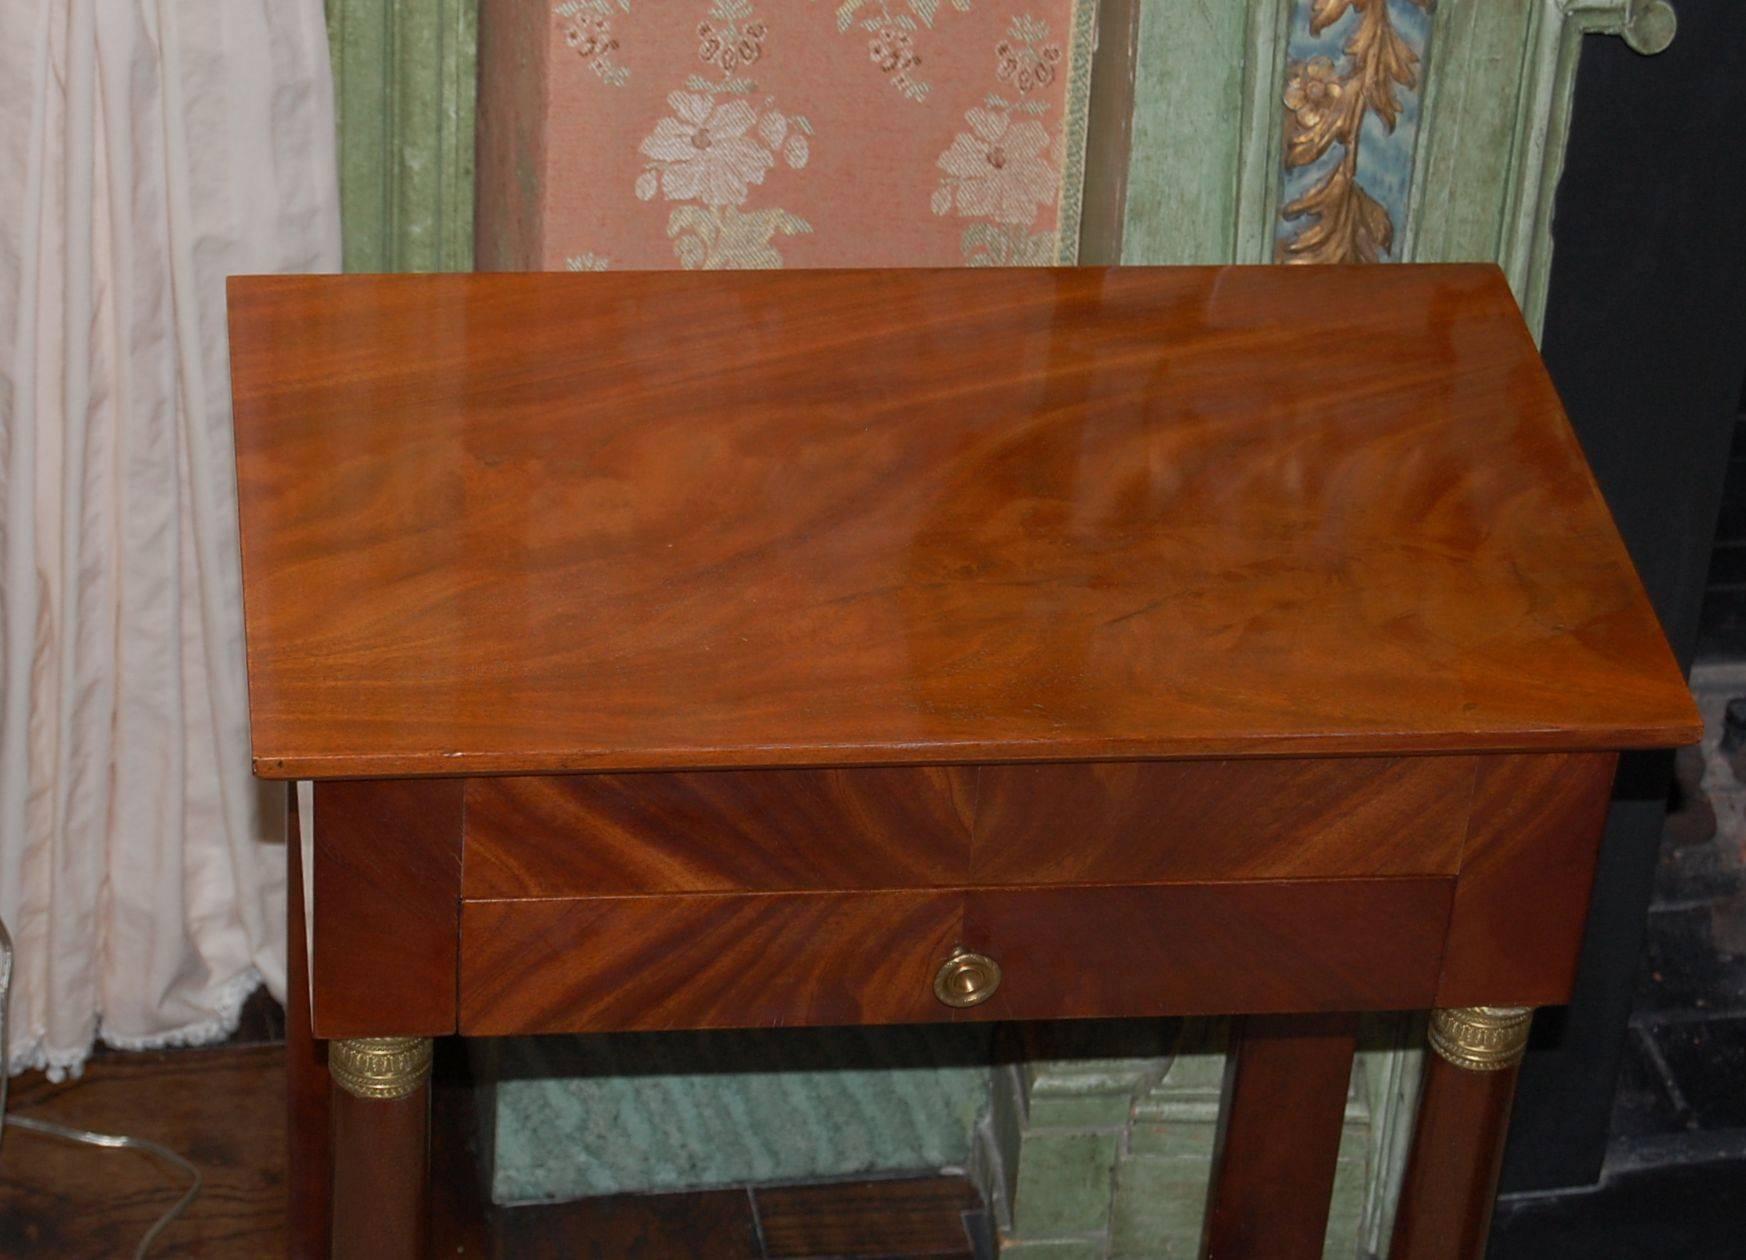 Late 19th Century Empire Mahogany Sewing or Dressing Table with Drawer and Flip-Up Top, circa 1880 For Sale